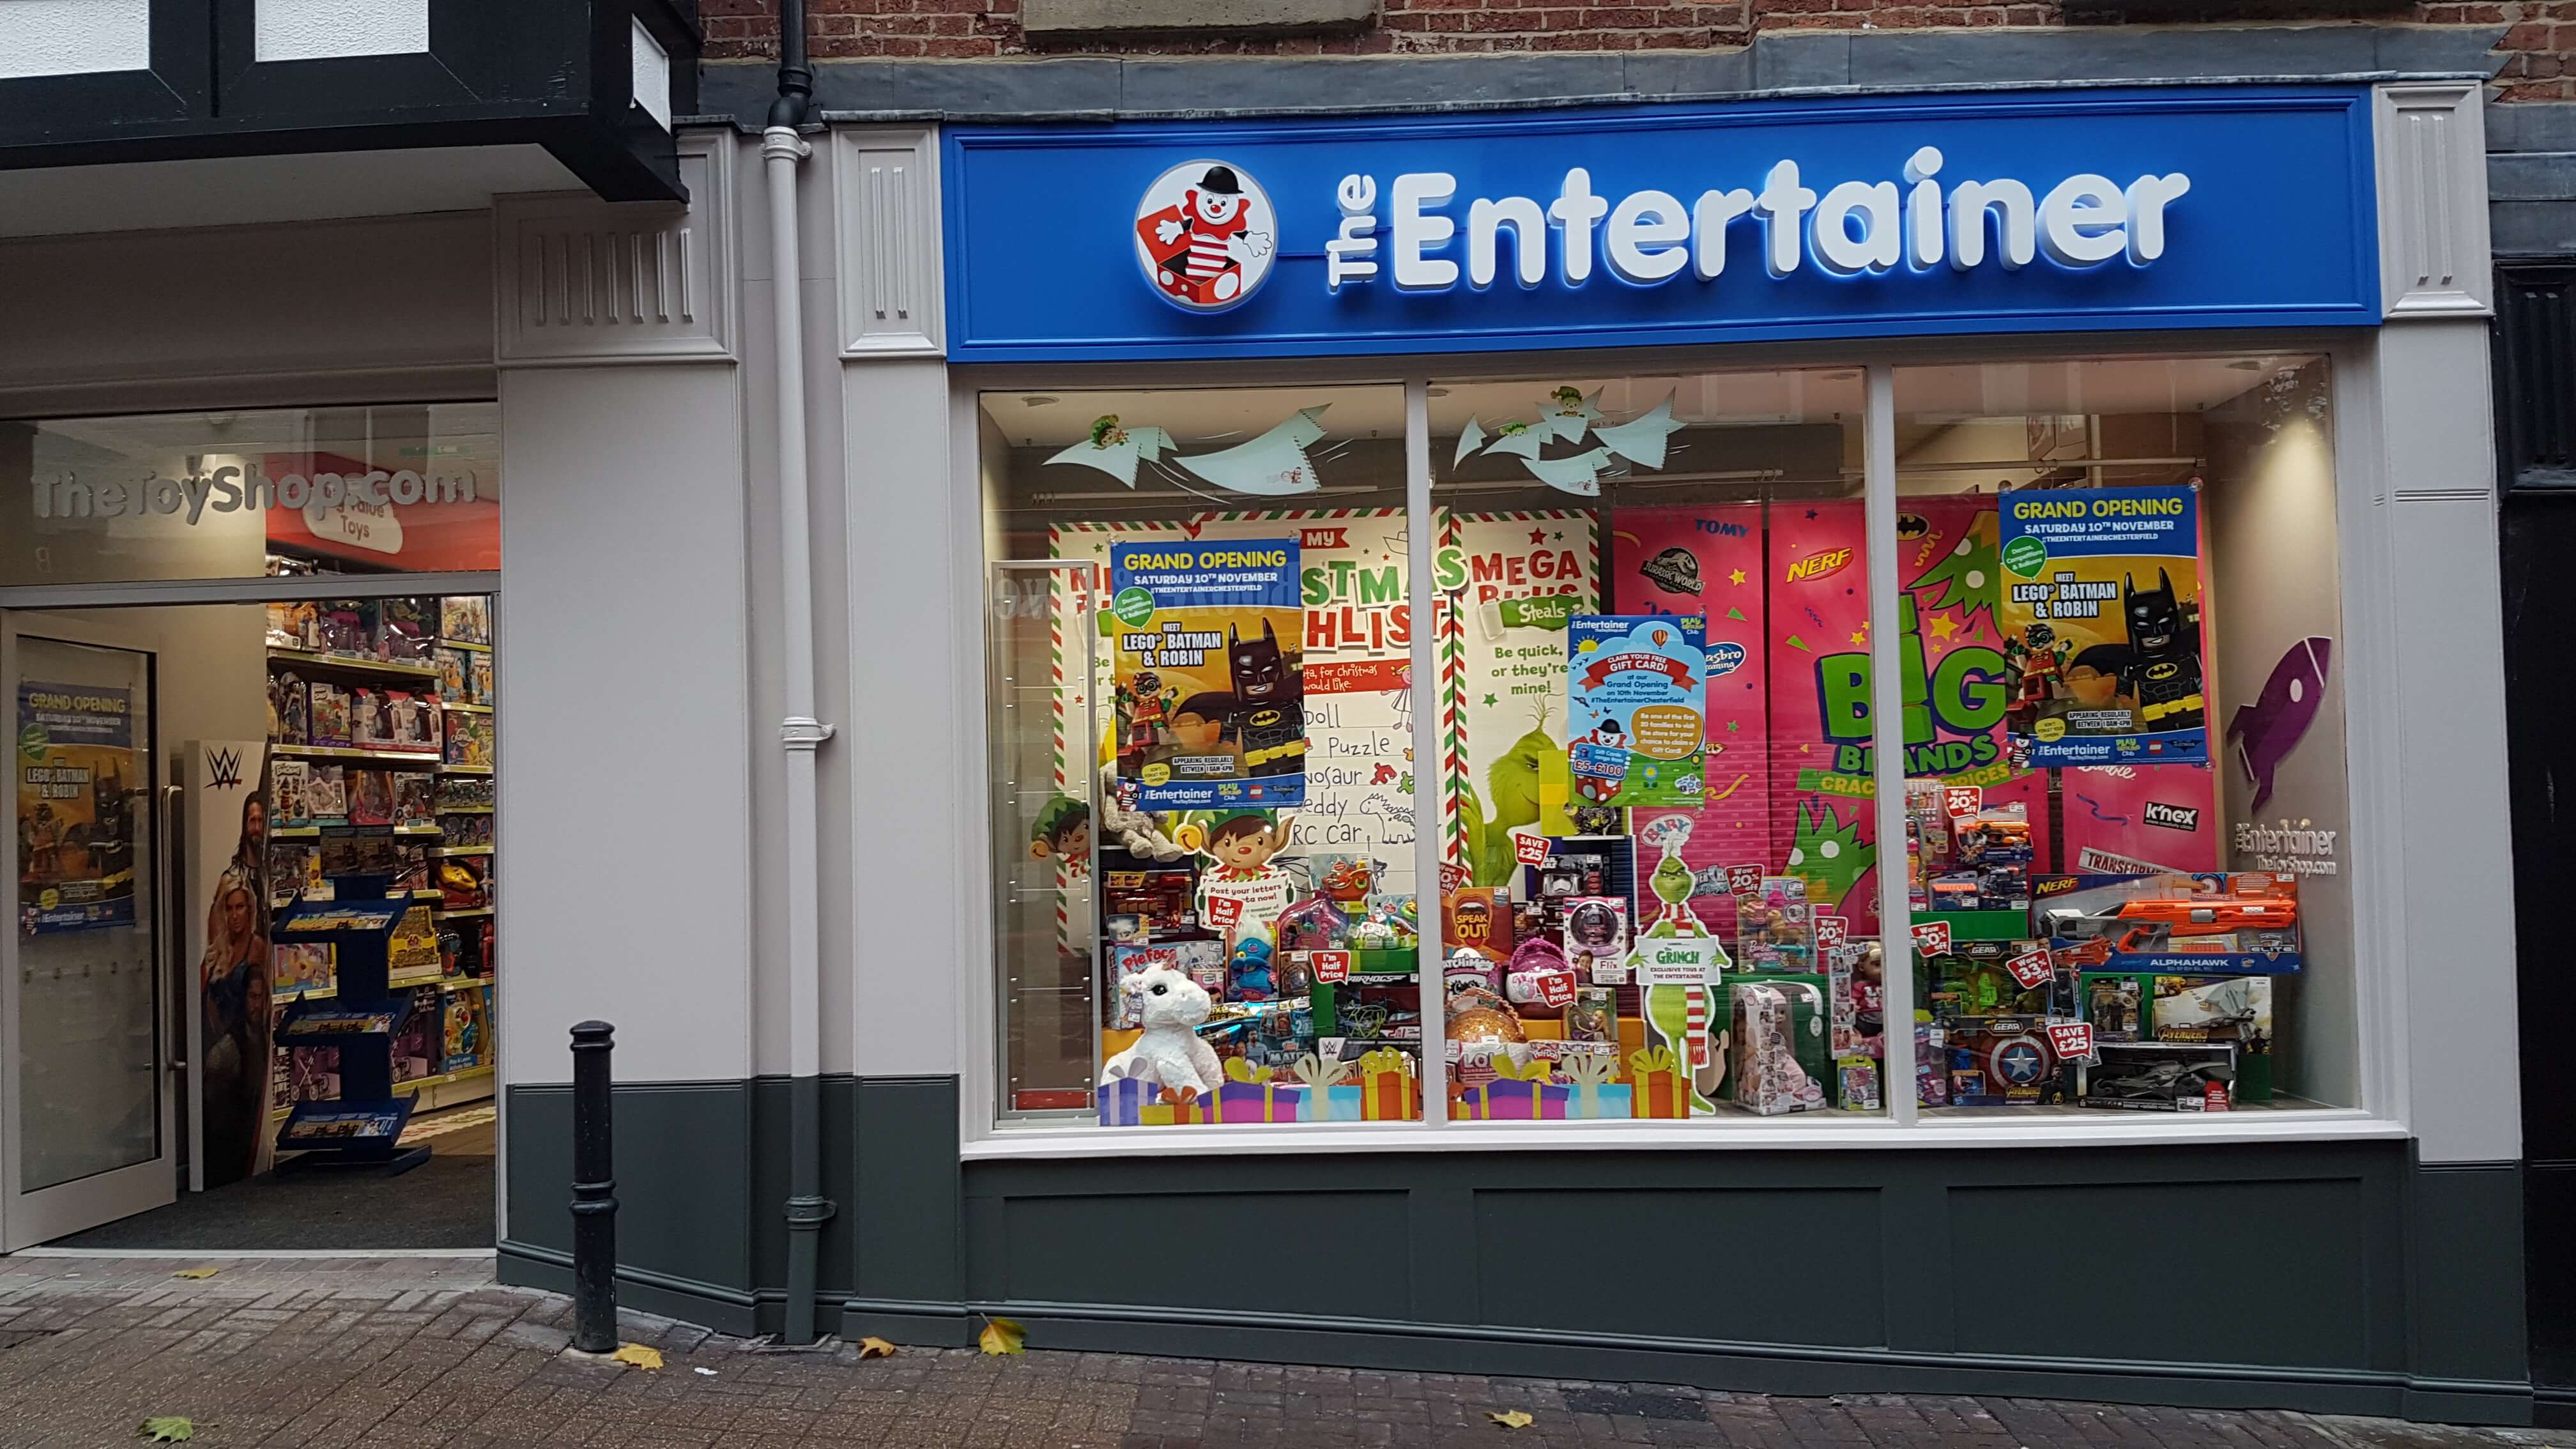 The Entertainer - Chesterfield